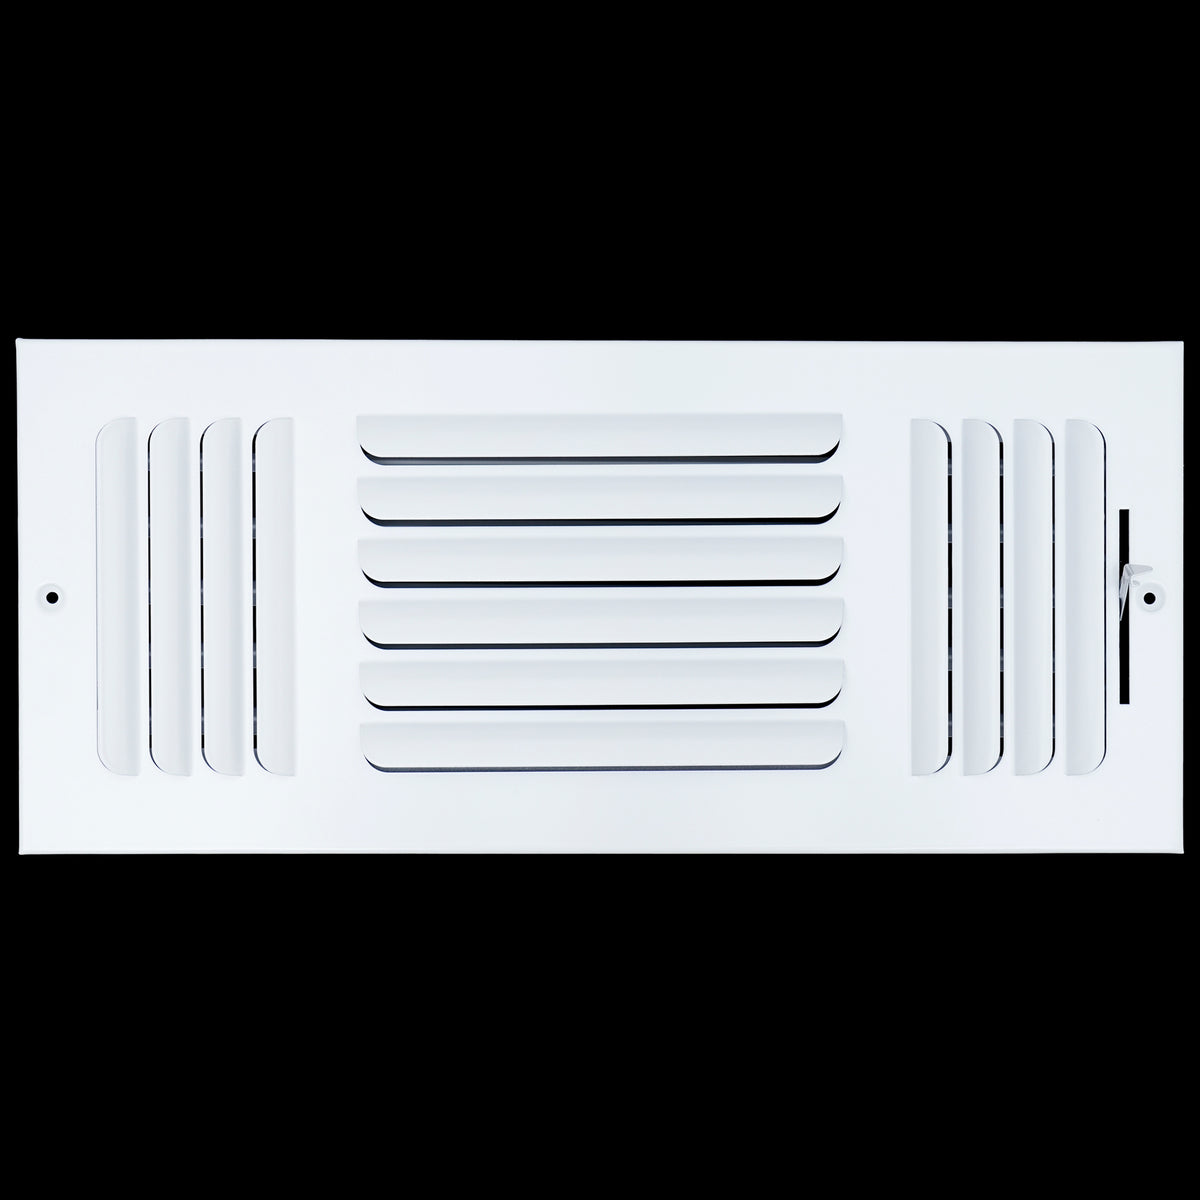 airgrilles 16"w x 6"h 3 way fixed curved blade air supply diffuser   register vent cover grill for sidewall and ceiling   white   outer dimensions: 17.75"w x 7.75"h hnd-cb-wh-3way-16x6  - 1